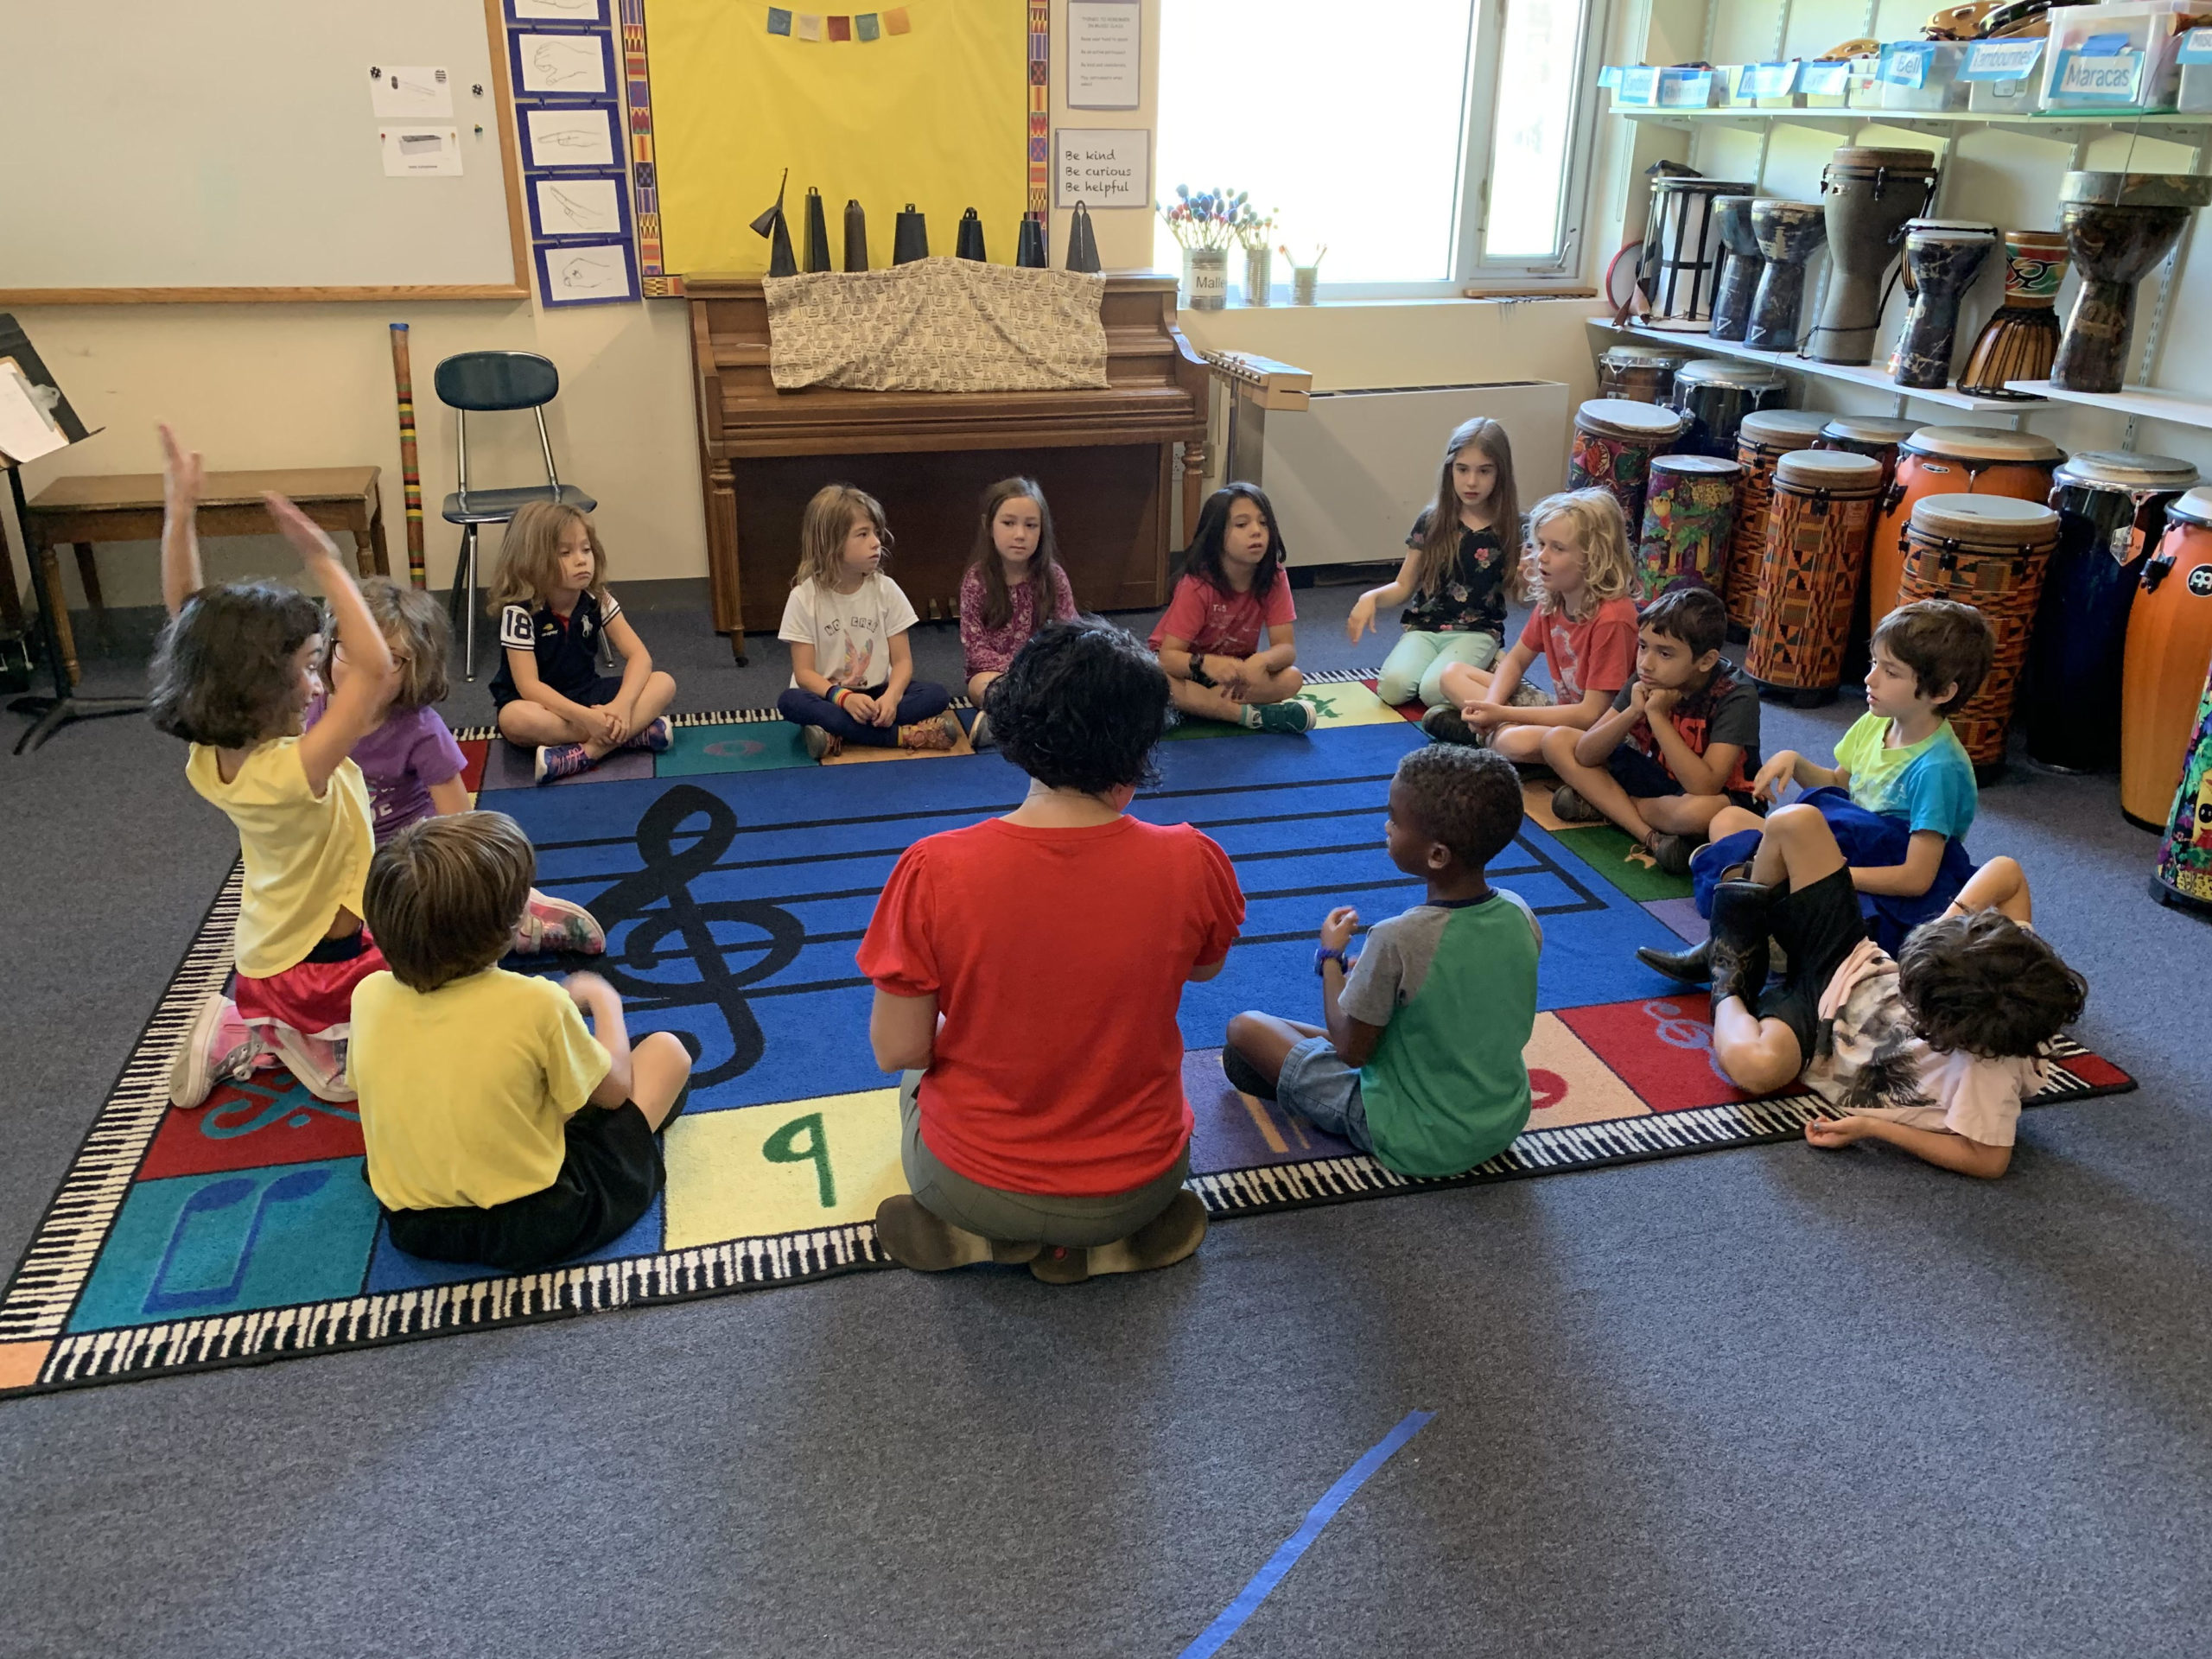 Elementary school students pay attention during instrumental music class at Cambridge Friends School.